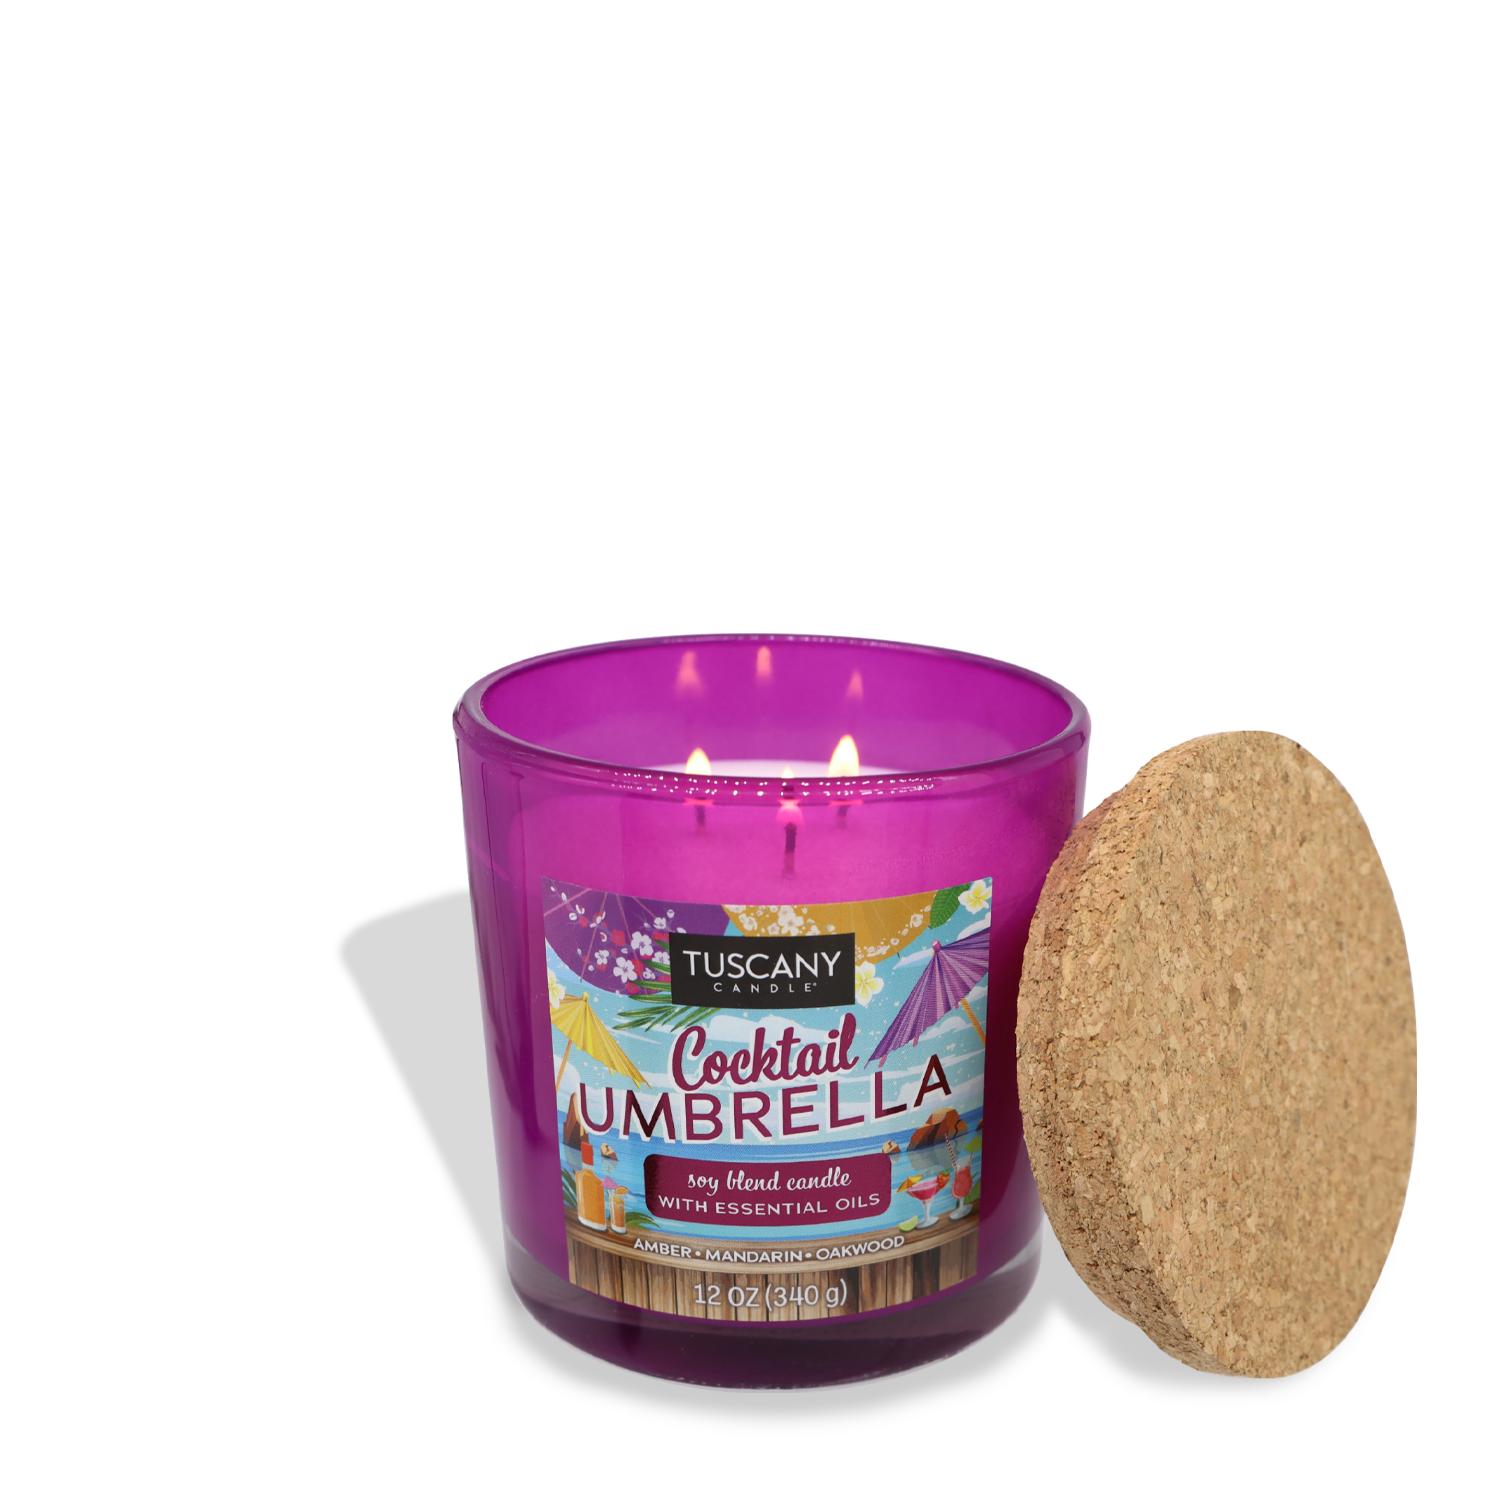 A purple Tuscany Candle® SEASONAL labeled "Cocktail Umbrella (12 oz) – Sunset Beach Bar Collection" with essential oils is lit. Notes of mandarin and oakwood mingle in the air, while the candle's cork lid is placed beside it.